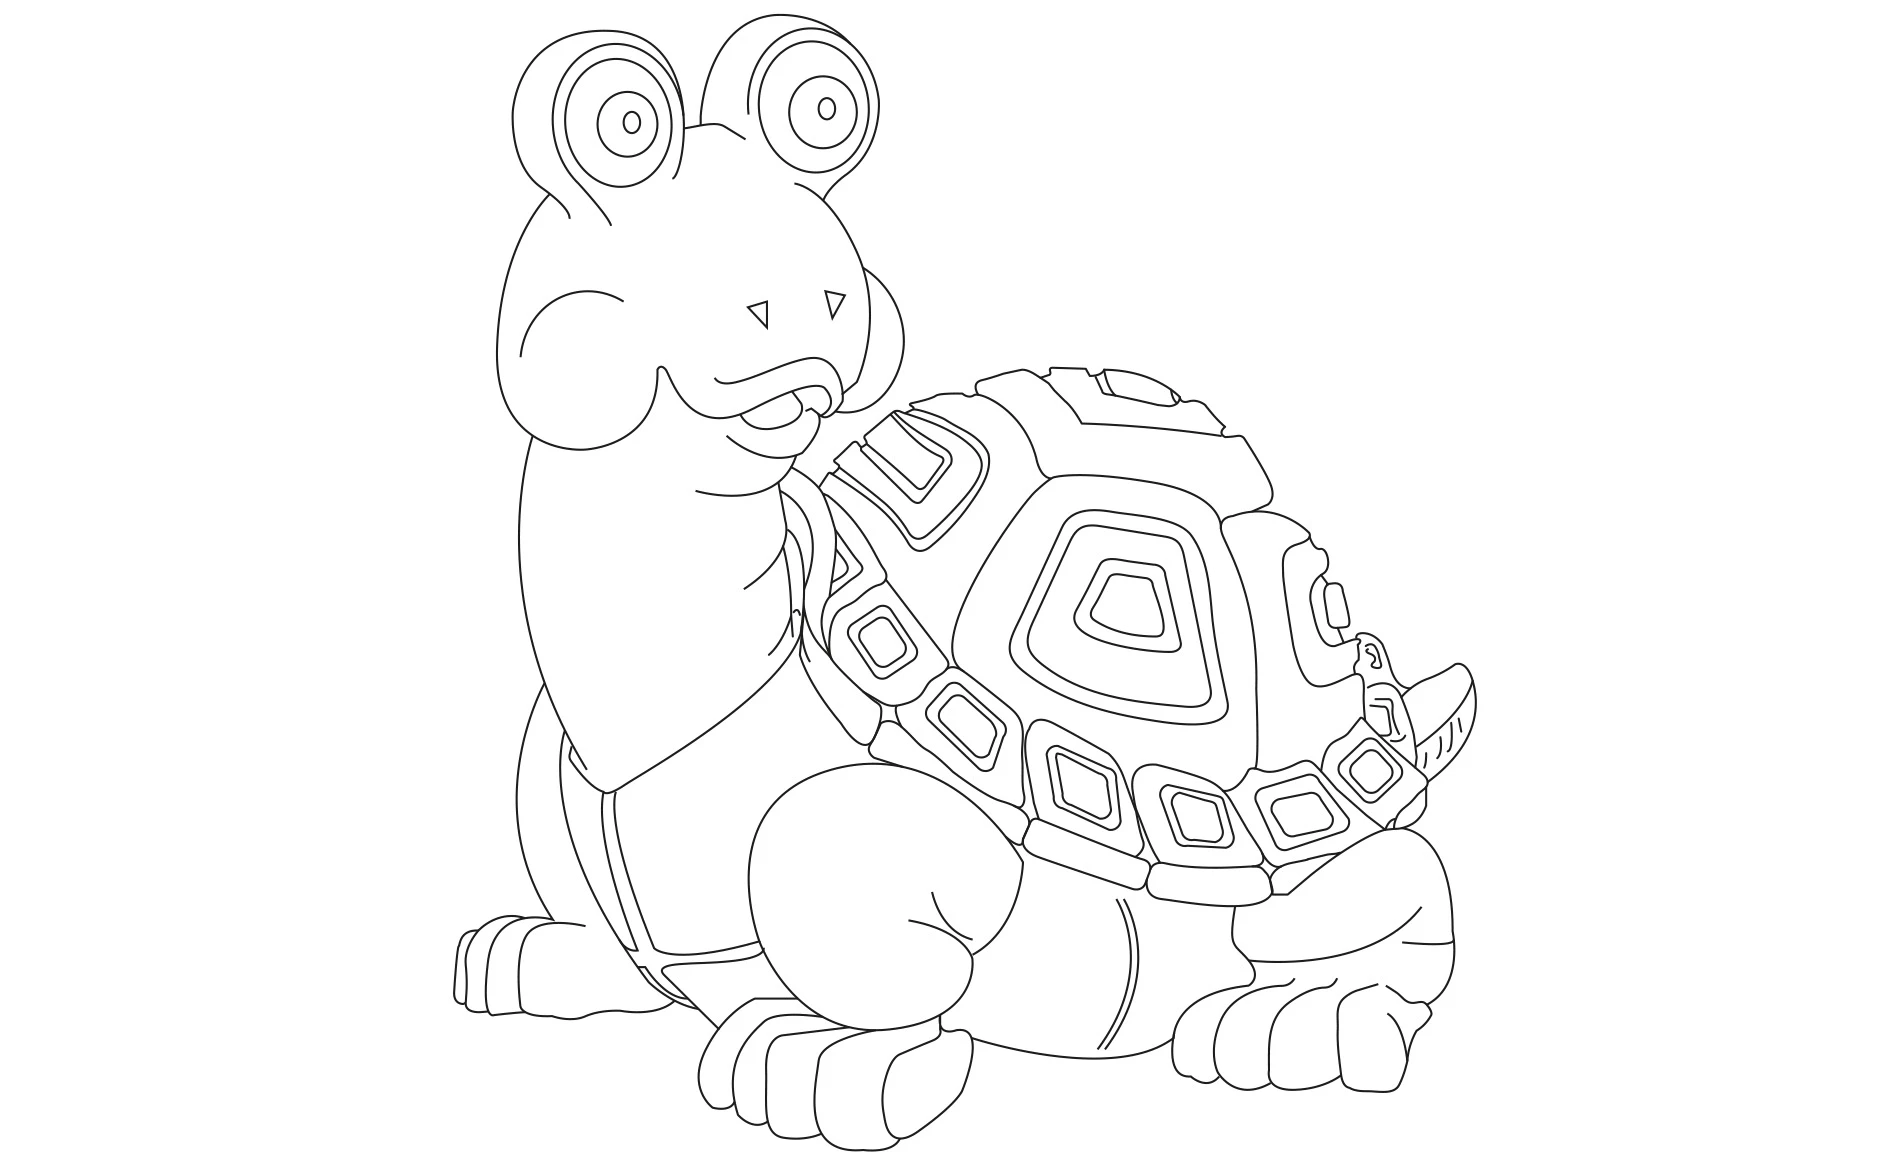 Coloriage Tortue